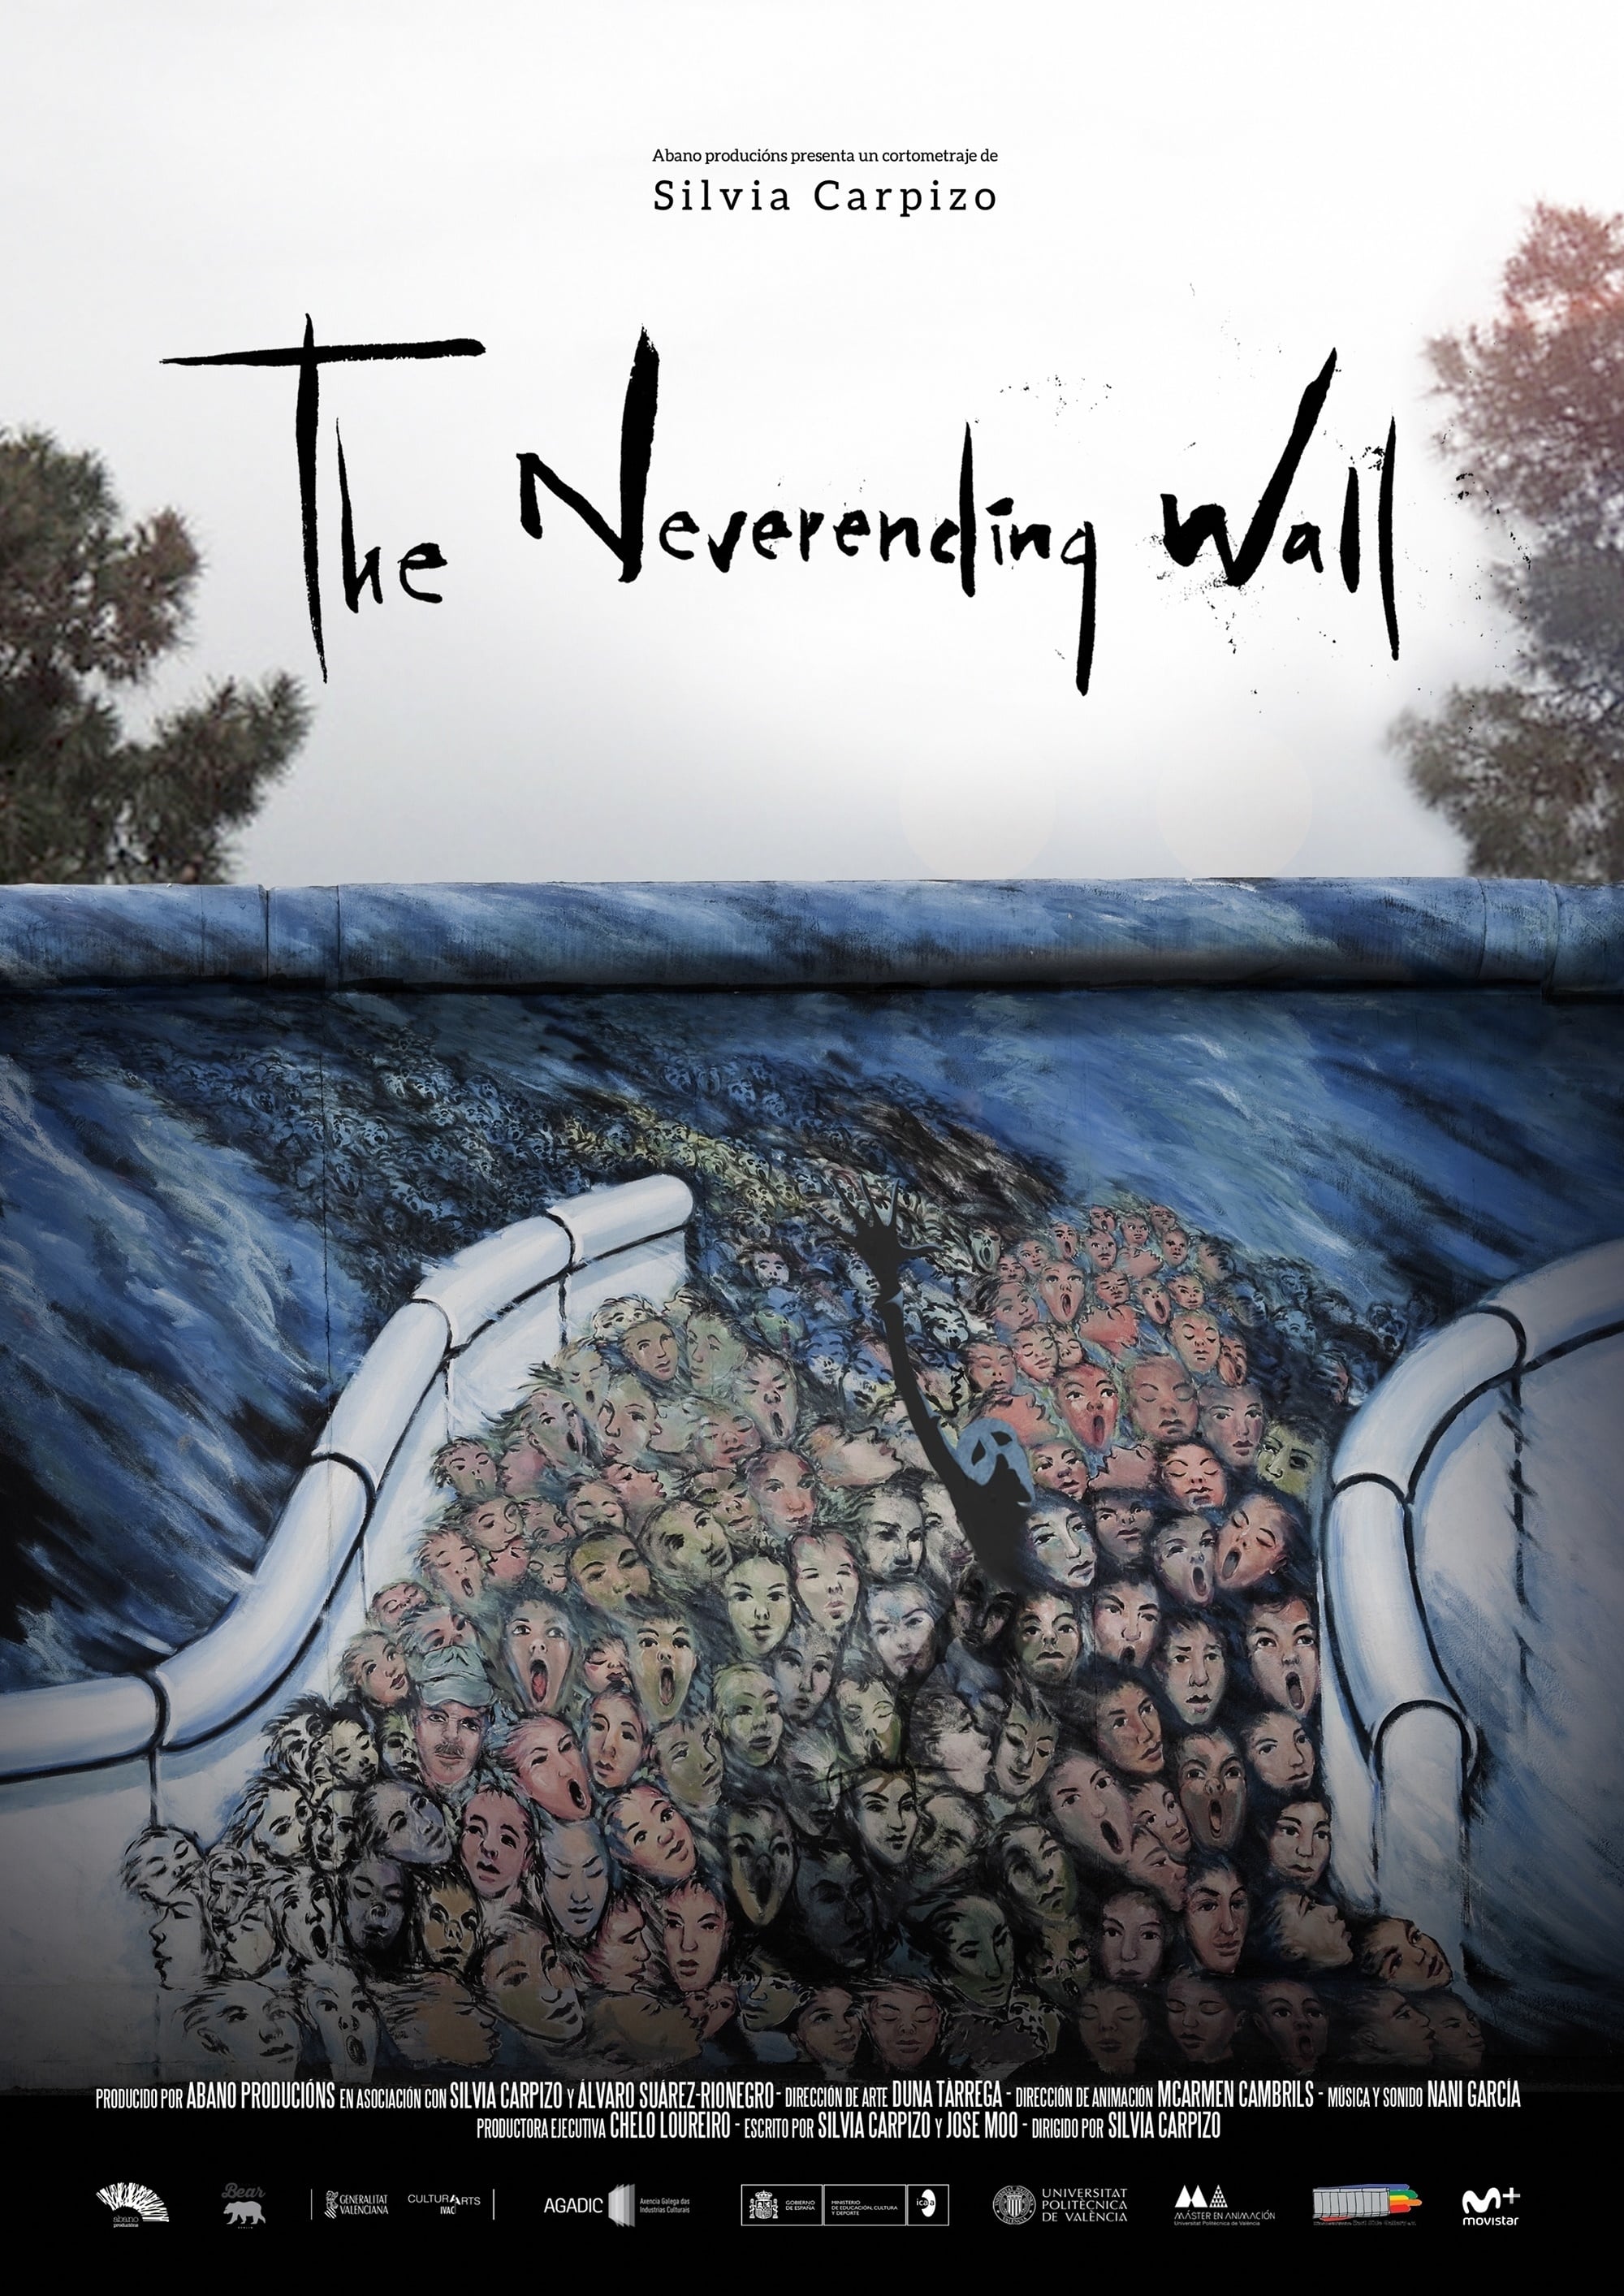 The Neverending Wall